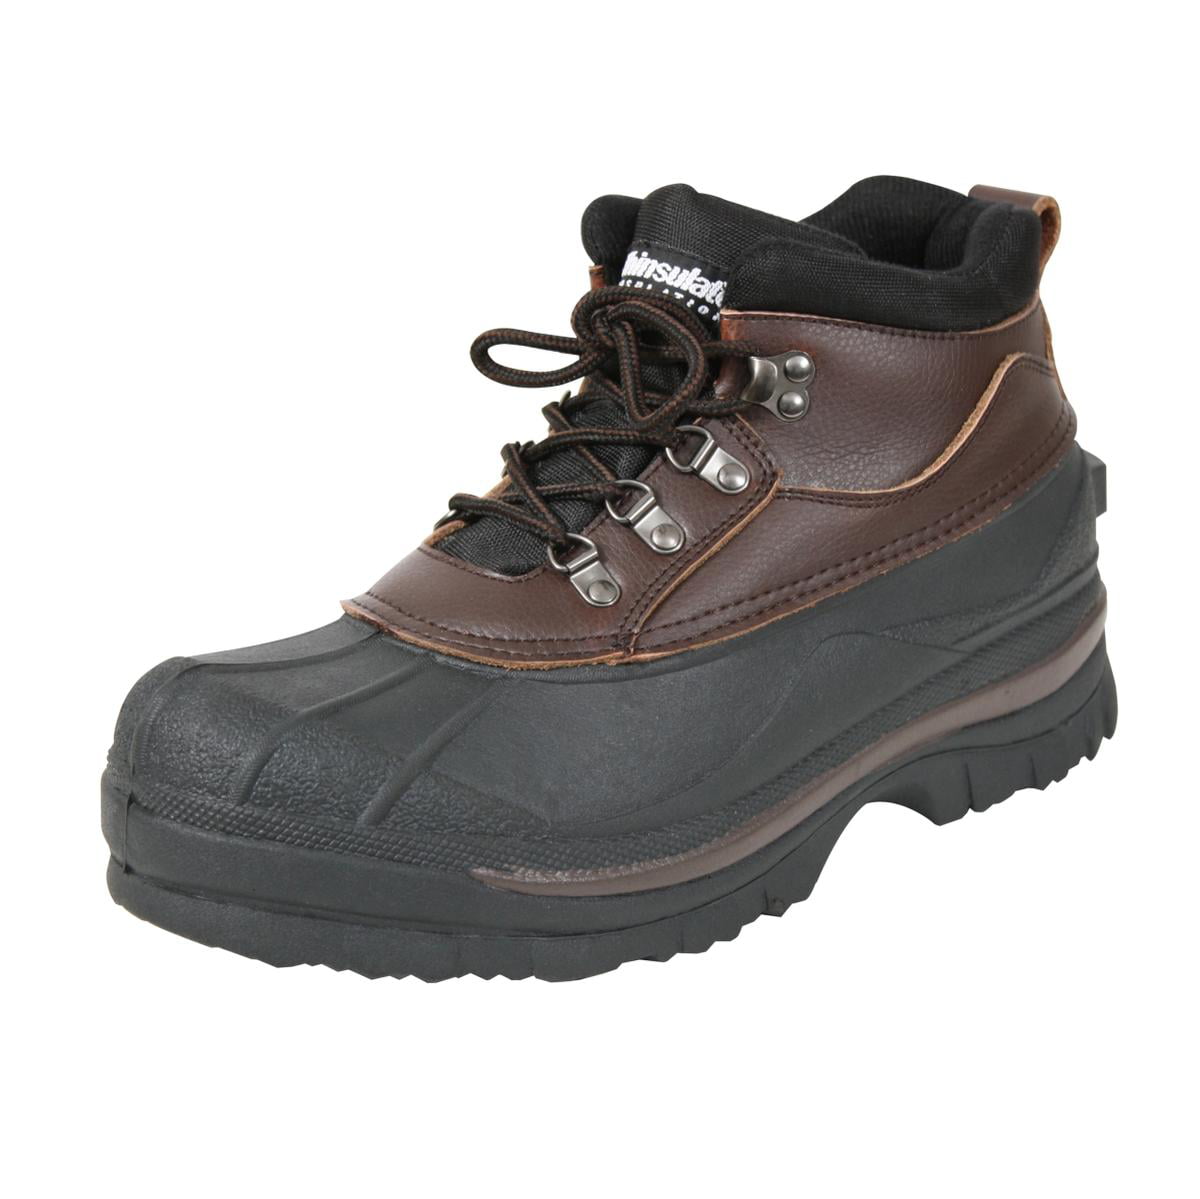 thinsulate duck boots